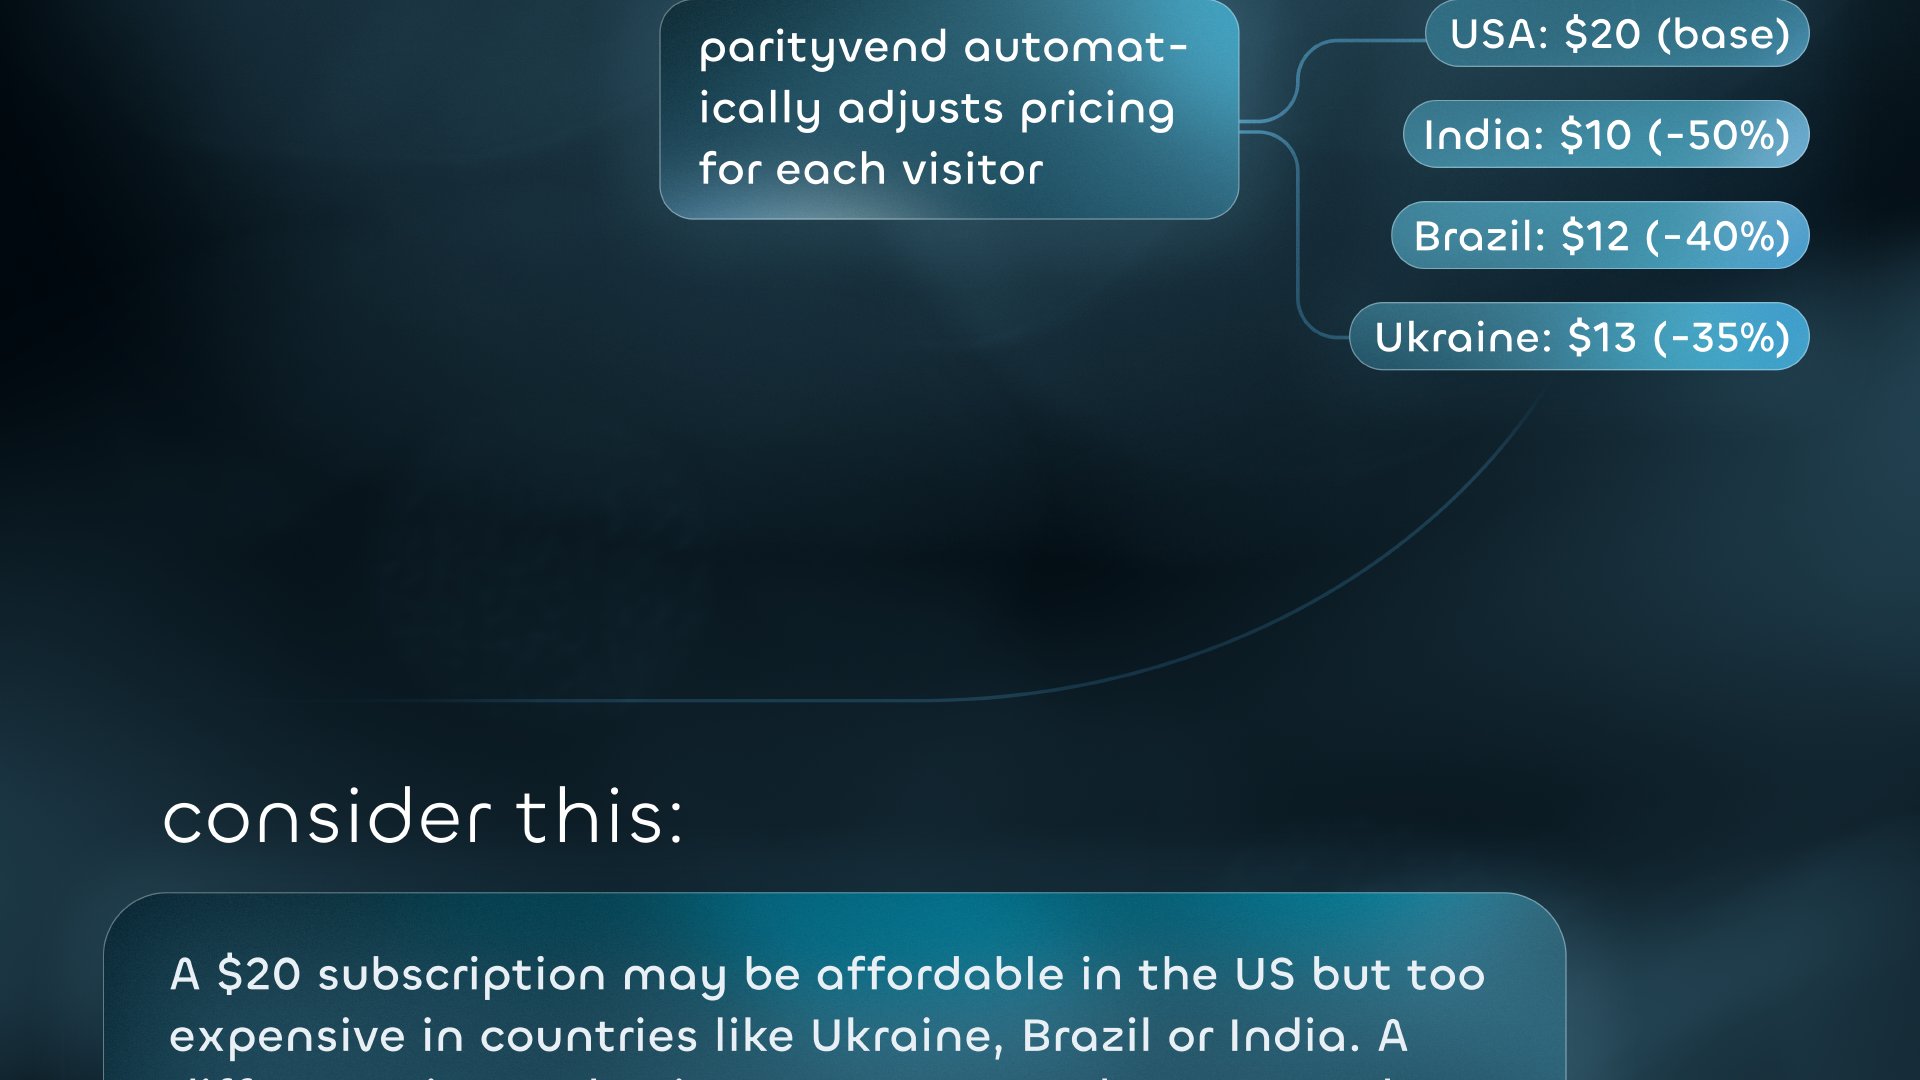 An abstract scheme shows how ParityVend automatically adapts pricing for each user that visits your website, based on their location. Users open your website, where ParityVend is installed. Then, ParityVend automatically identifies the user's location and changes the prices on your website according to your configured discounts.